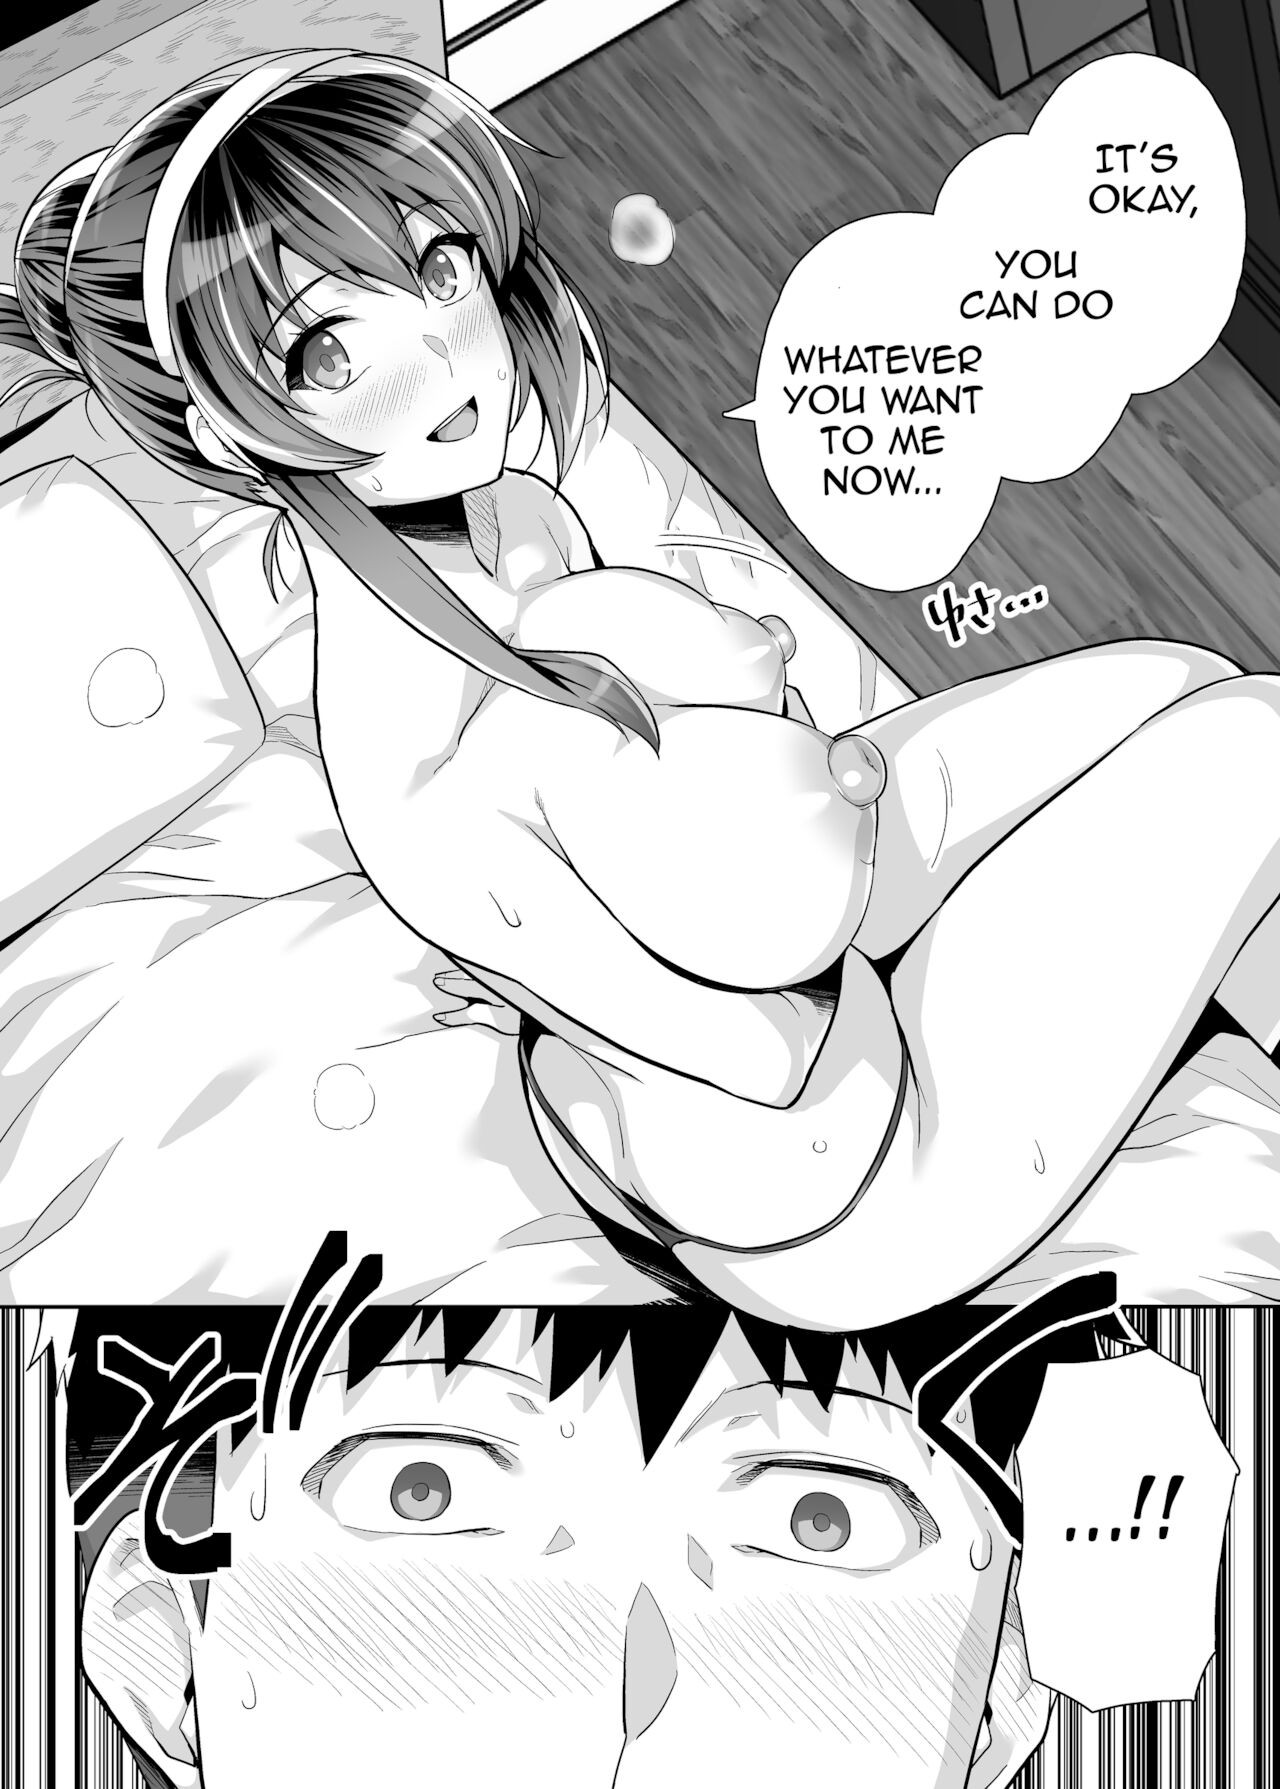 My Sister Sleeps With My Dad Part 3 Porn Comic english 29